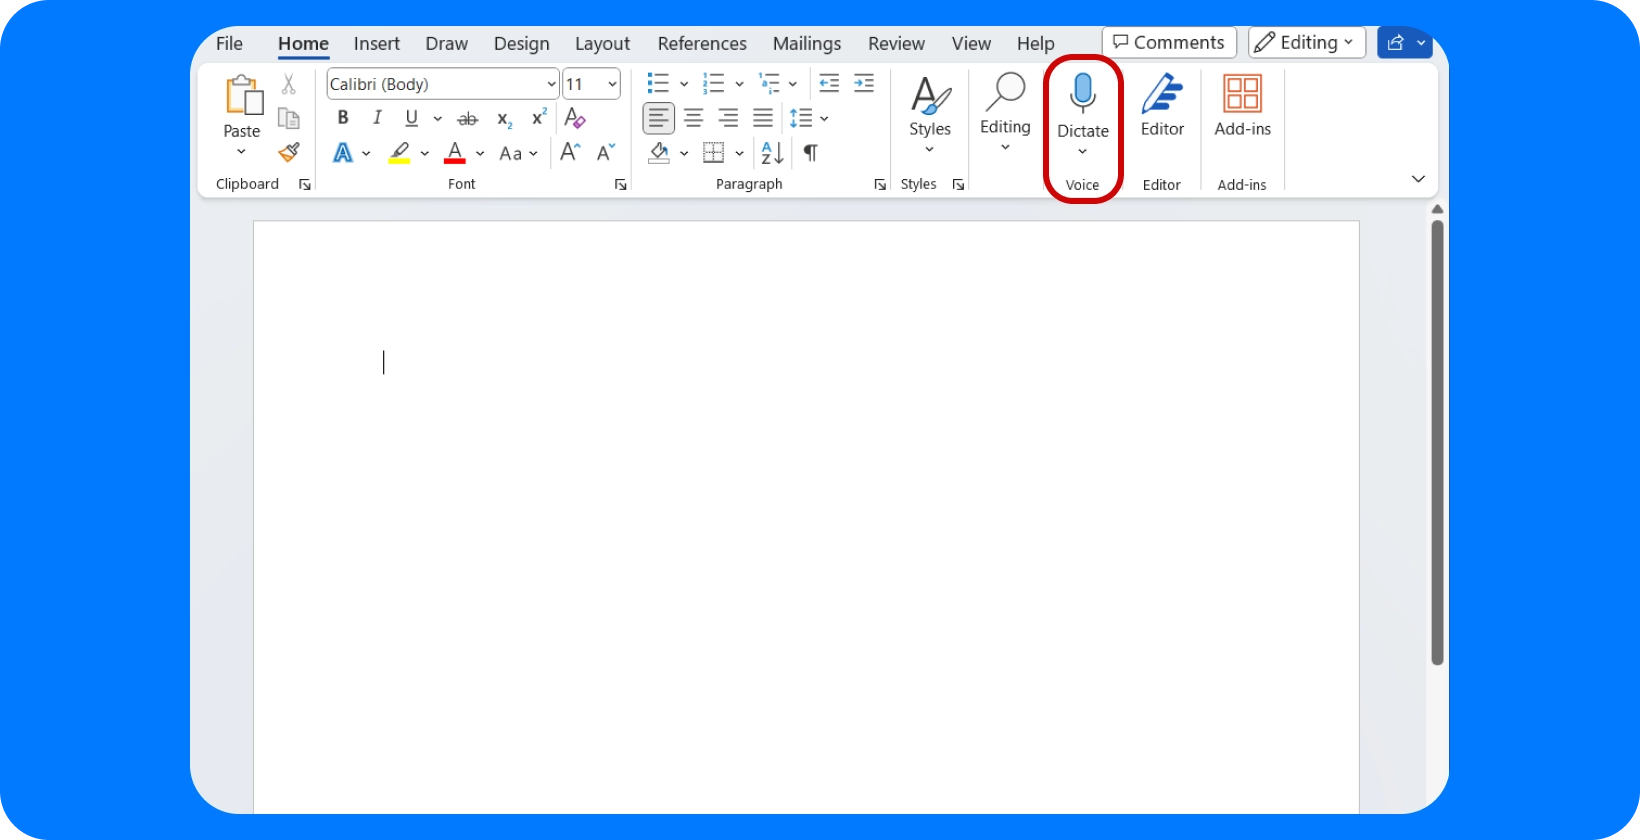 Microsoft Word interface with a focus on the 'Dictate' function for easy voice-typing.